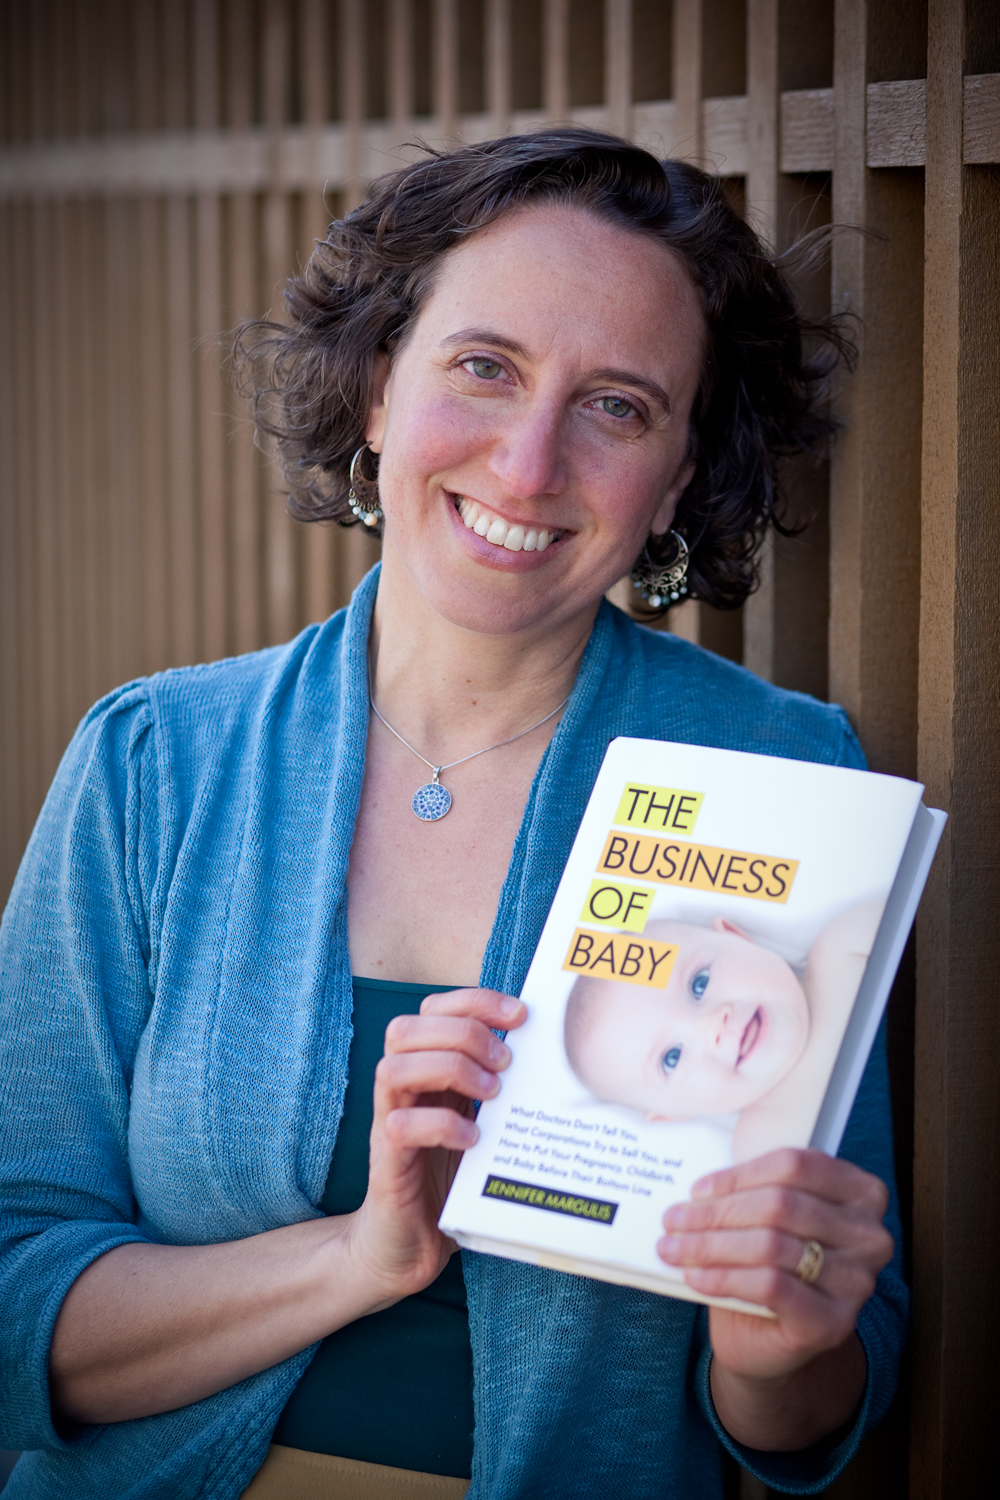 The business of baby